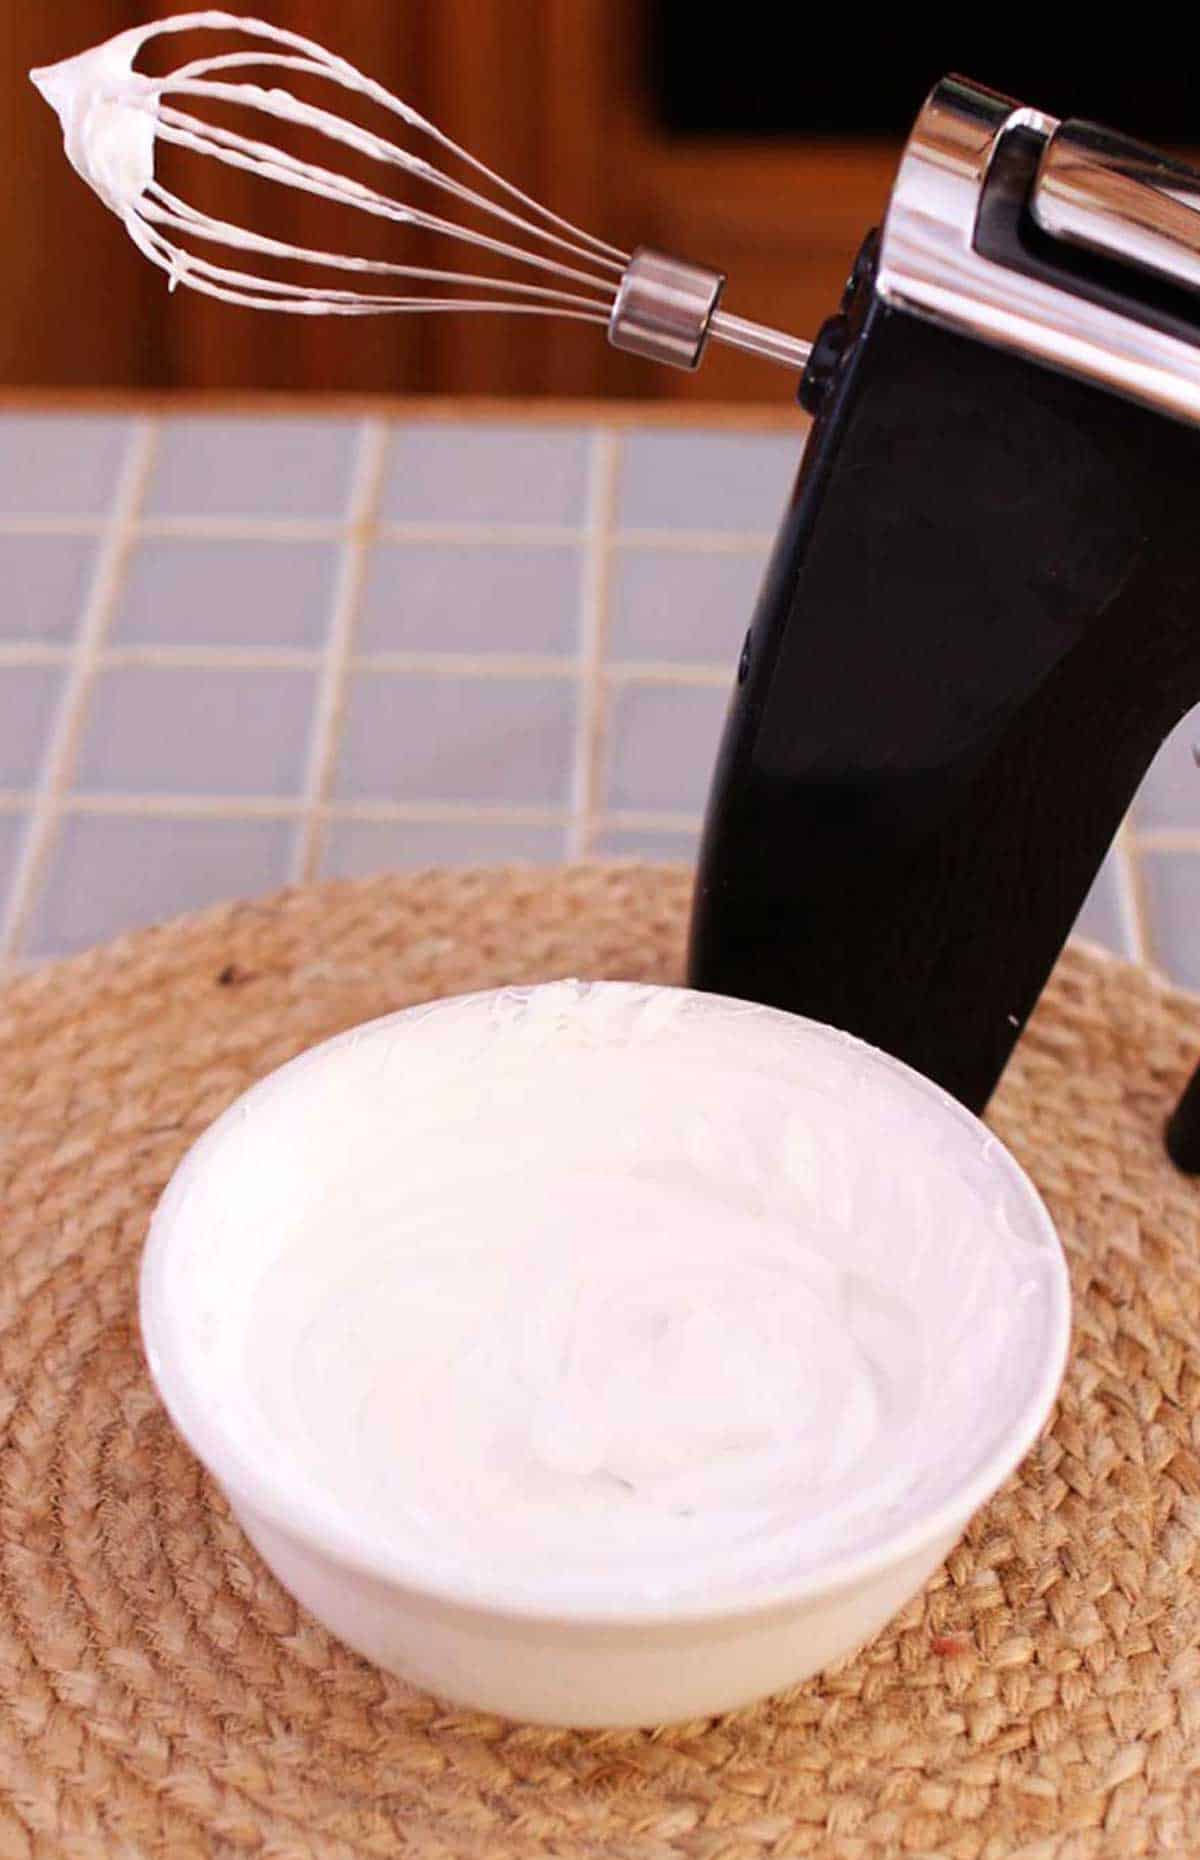 A bowl of freshly whipped cream next to an electric hand mixer with cream on the whisk.